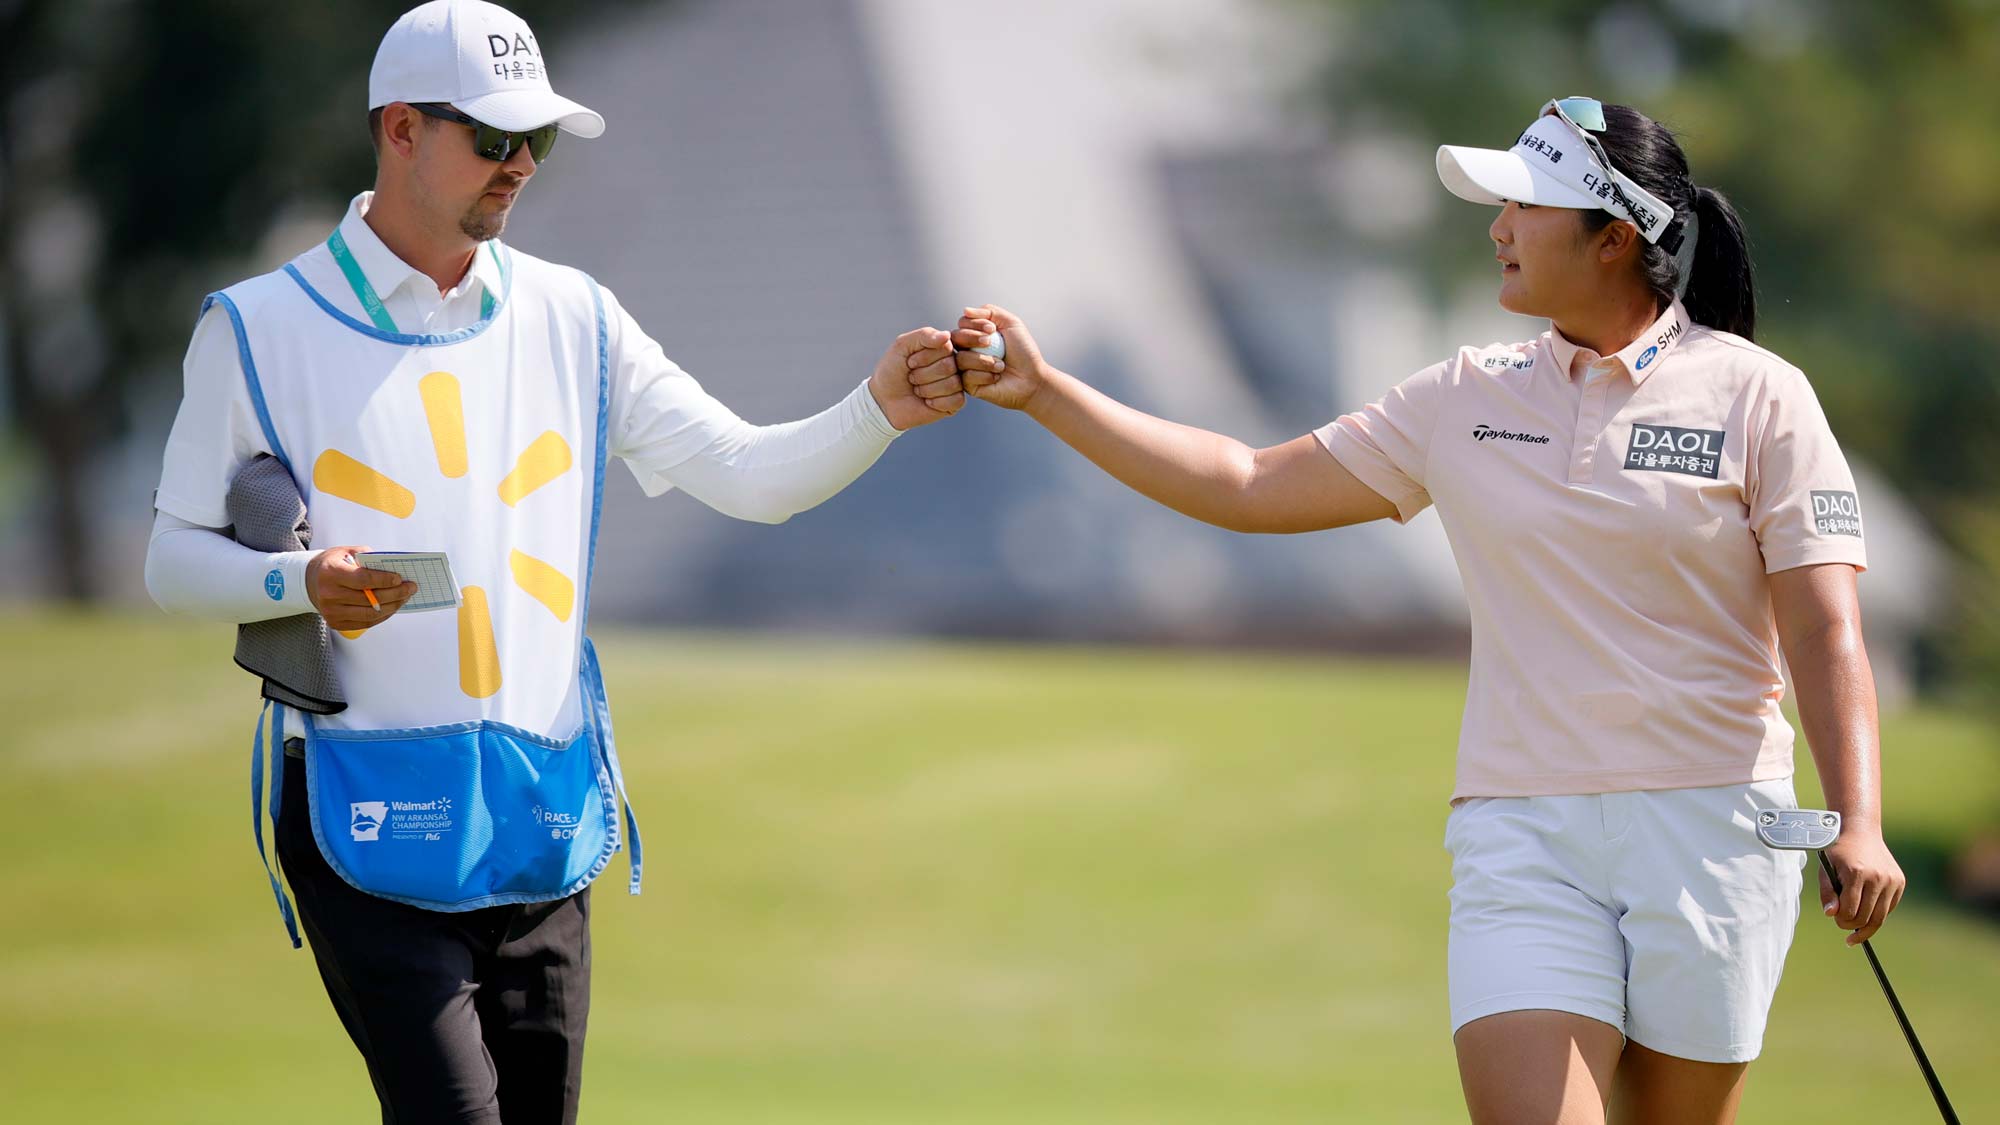 Hae Ran Ryu of South Korea reacts to her birdie putt with her caddie on the first green during the Final round of the Walmart NW Arkansas Championship presented by P&G at Pinnacle Country Club